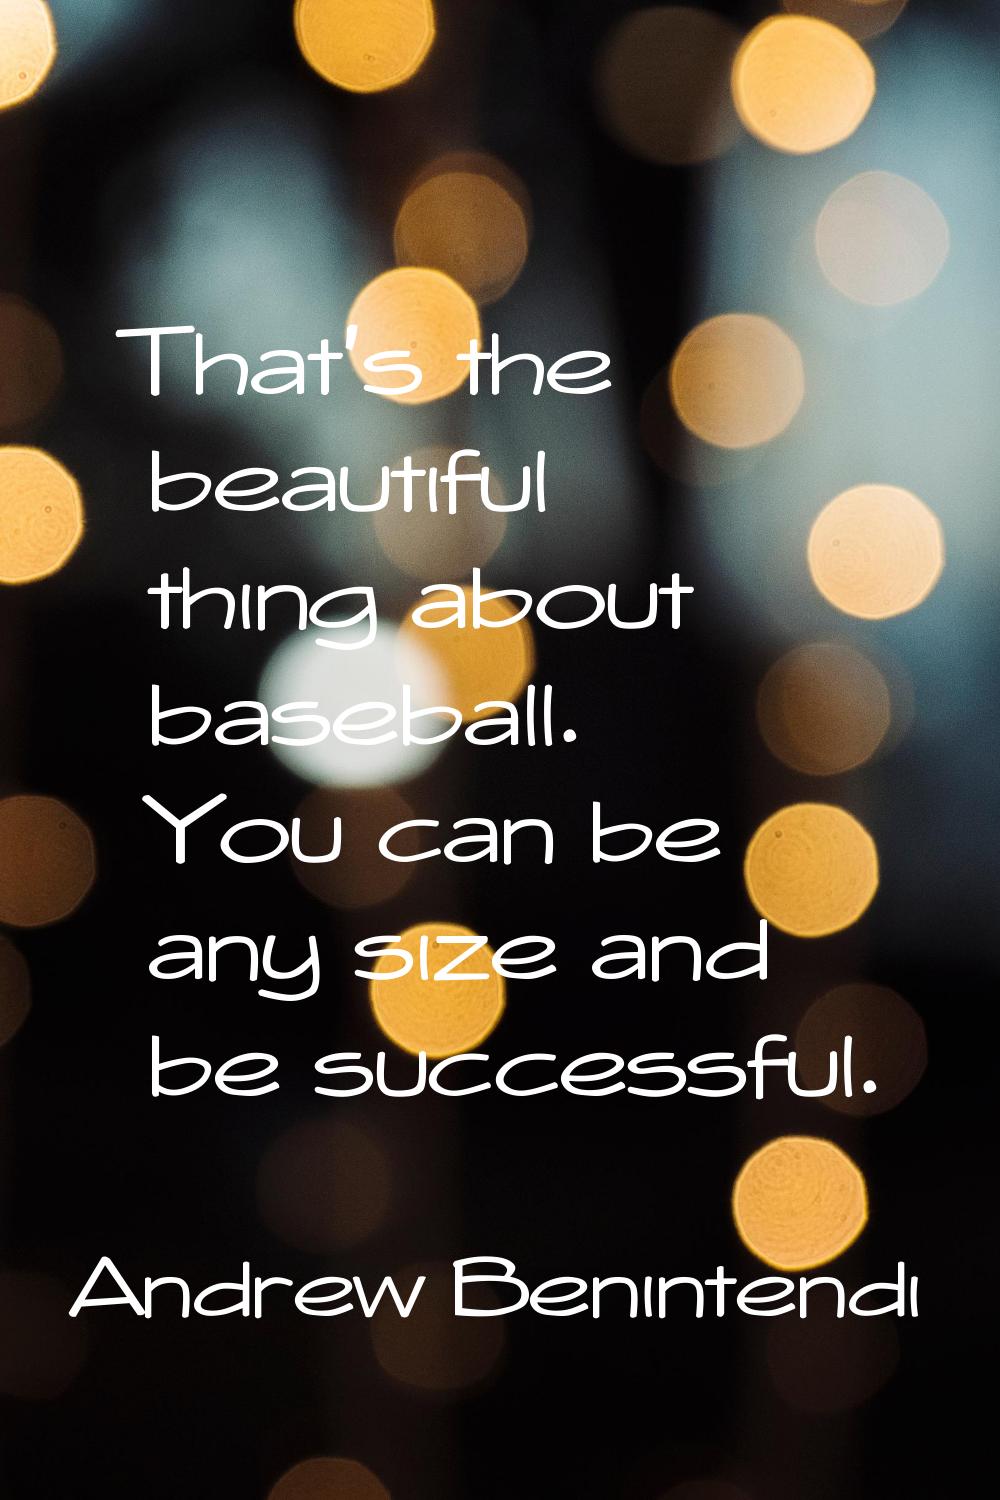 That's the beautiful thing about baseball. You can be any size and be successful.